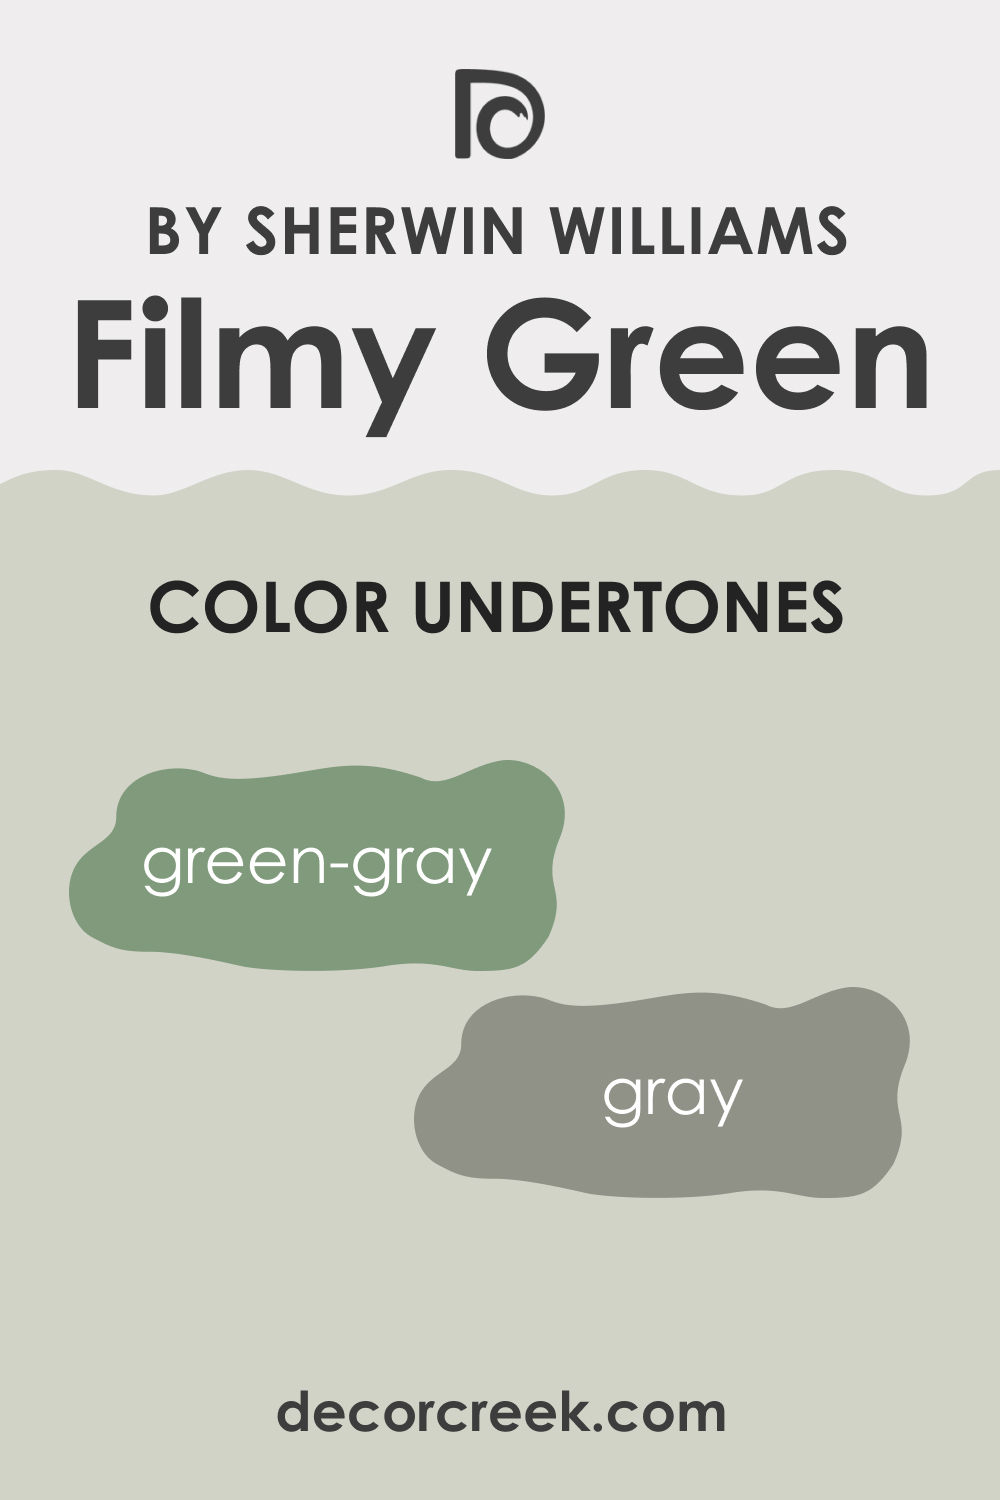 What Undertones Does Filmy Green SW 6190 Have?